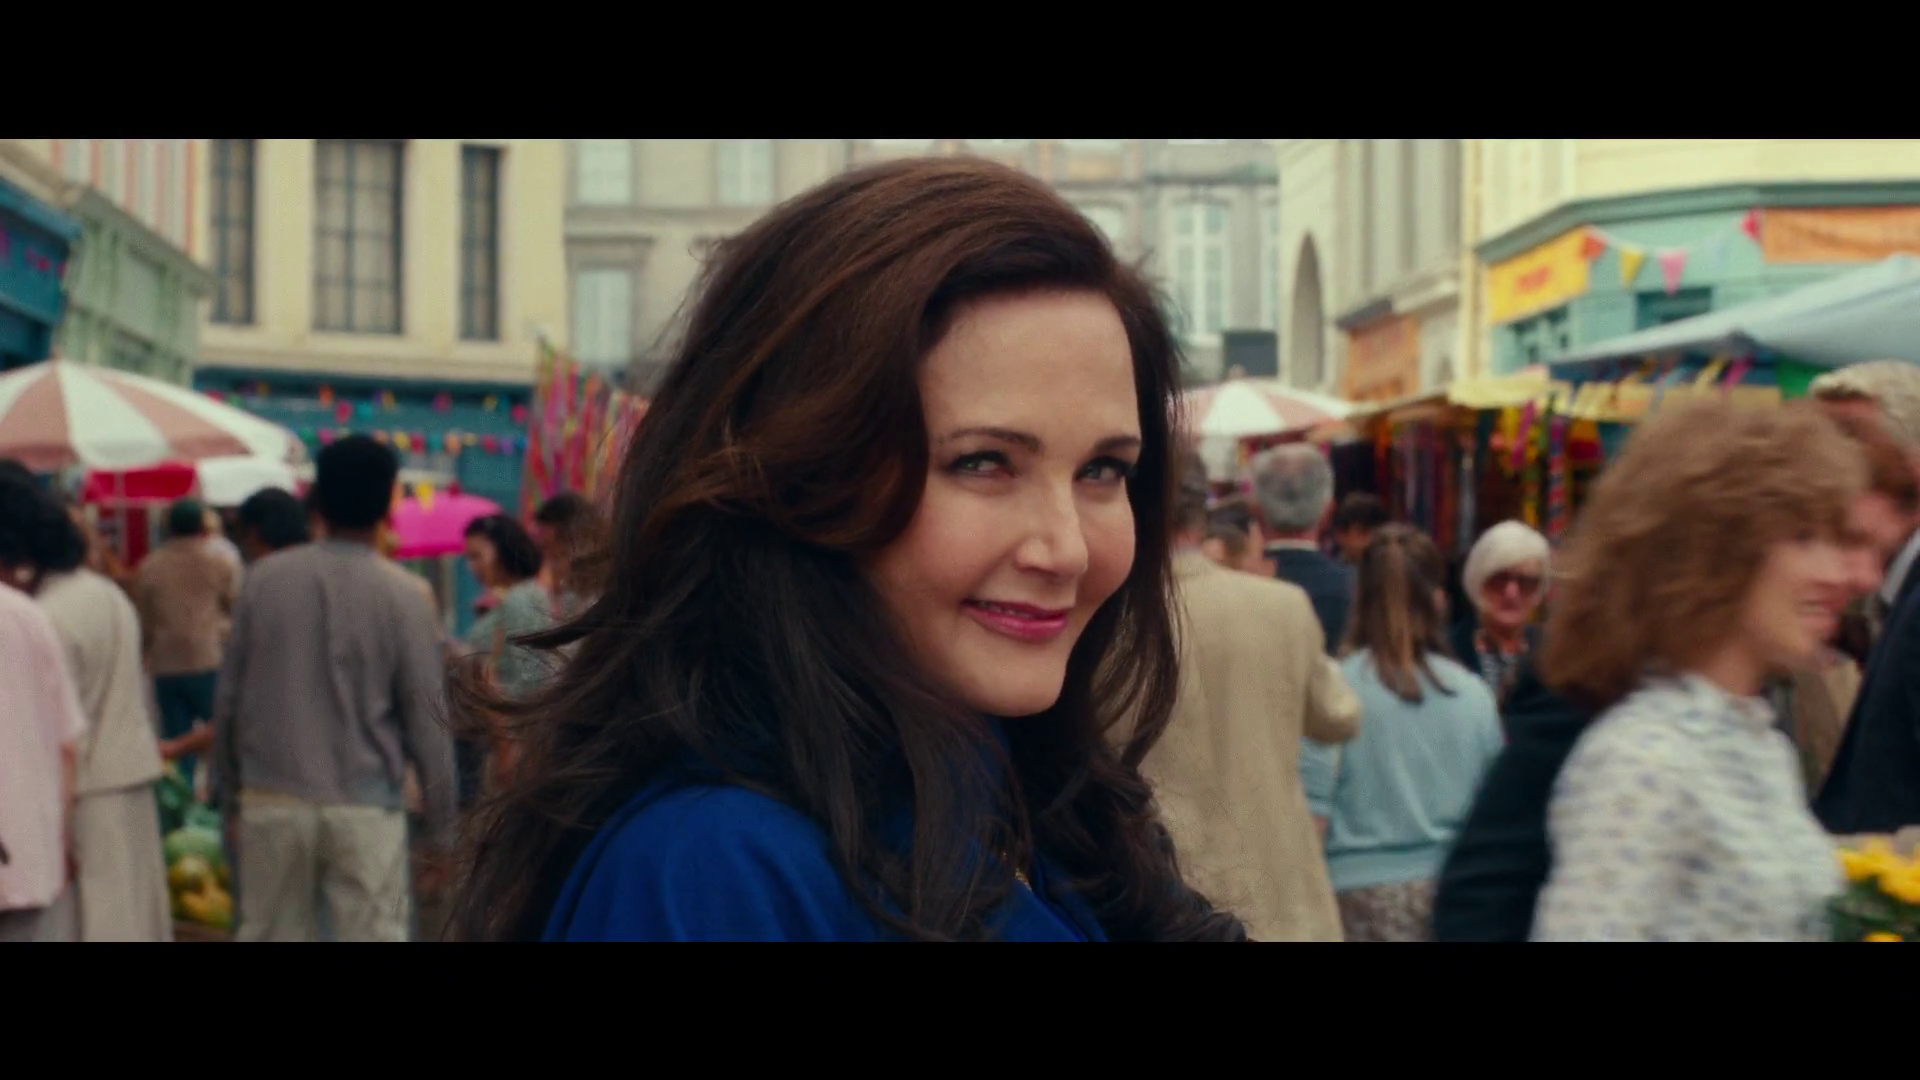 Asteria (Lynda Carter) gives a winking nod to the audience in Wonder Woman 1984 (2020), Warner Bros. Pictures via Blu-ray